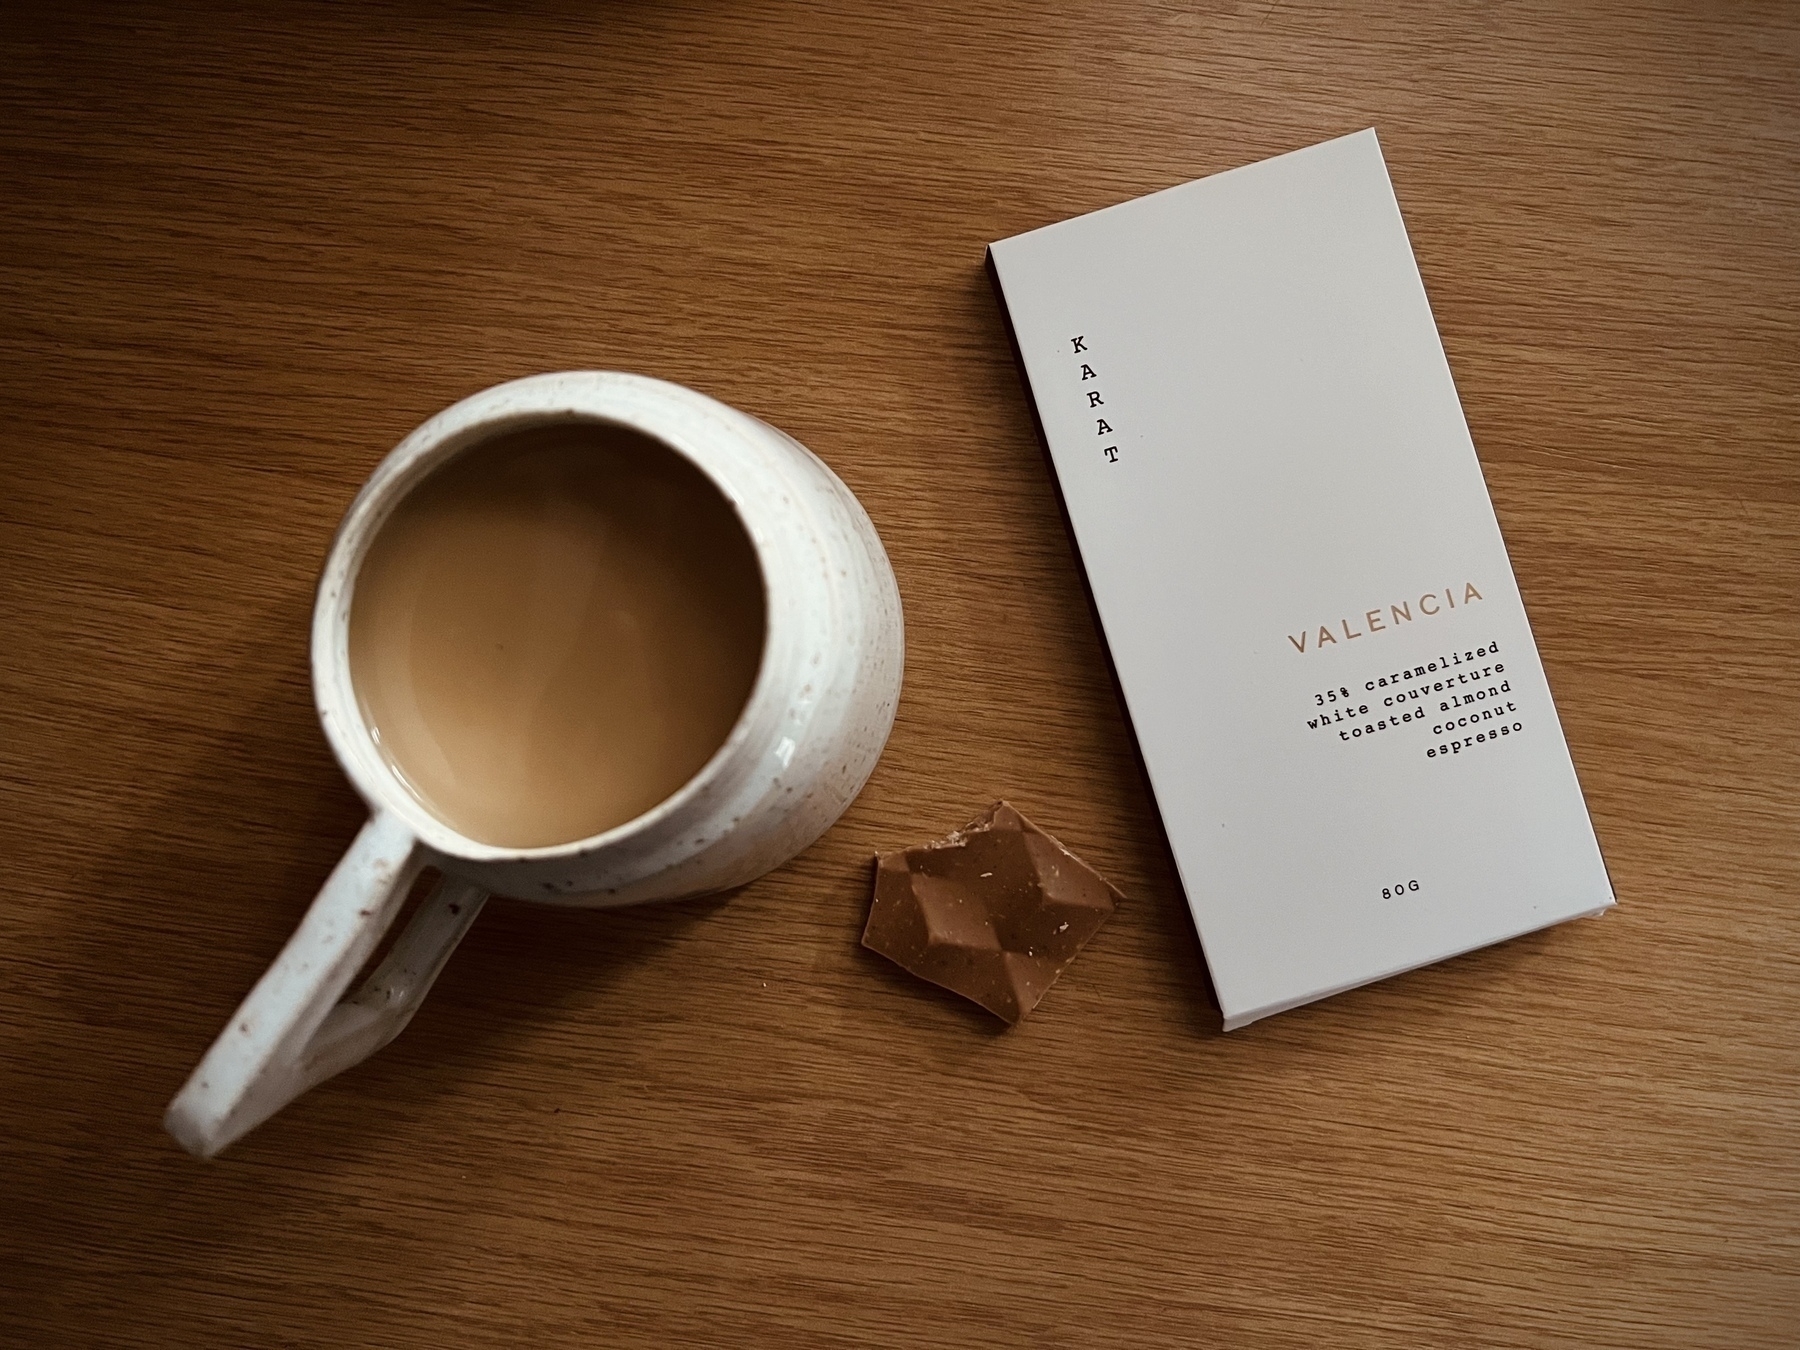 Top down photograph of an off-white ceramic mug with black spots filled with coffee, a bar of chocolate from Canadian maker Karat, and a piece of chocolate with bite marks on a faux-wood tabletop. 